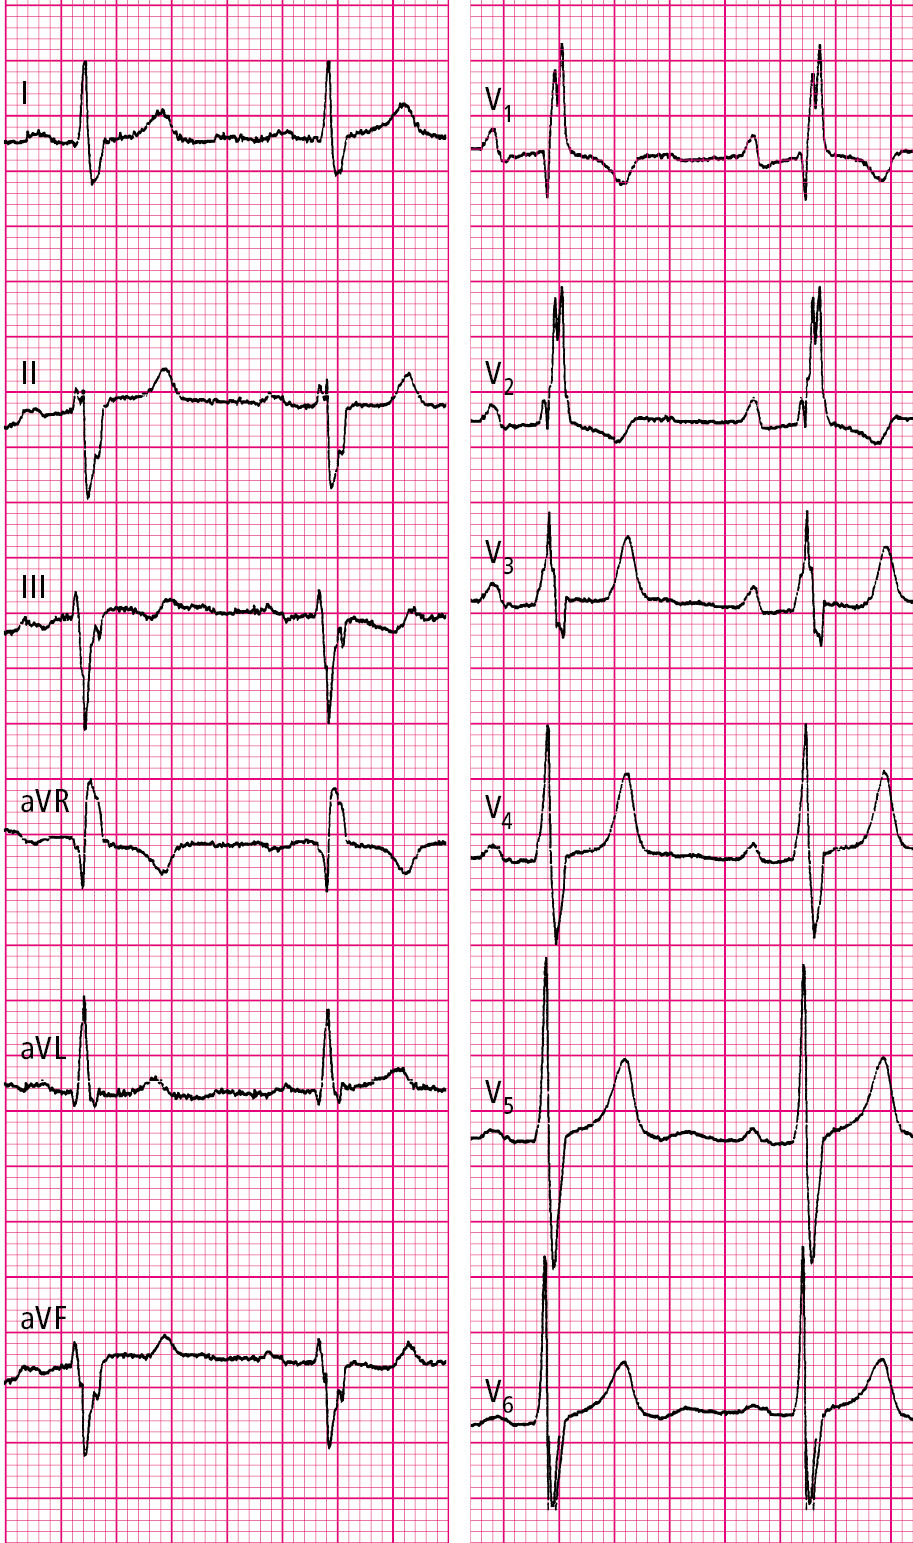 Figure 031_3053.  Electrocardiography (ECG) of a patient with atrial septal defect (ASD) type I: normal sinus rhythm, 69 beats/min, left axis deviation, right bundle branch block (RBBB), features of right ventricular hypertrophy. 